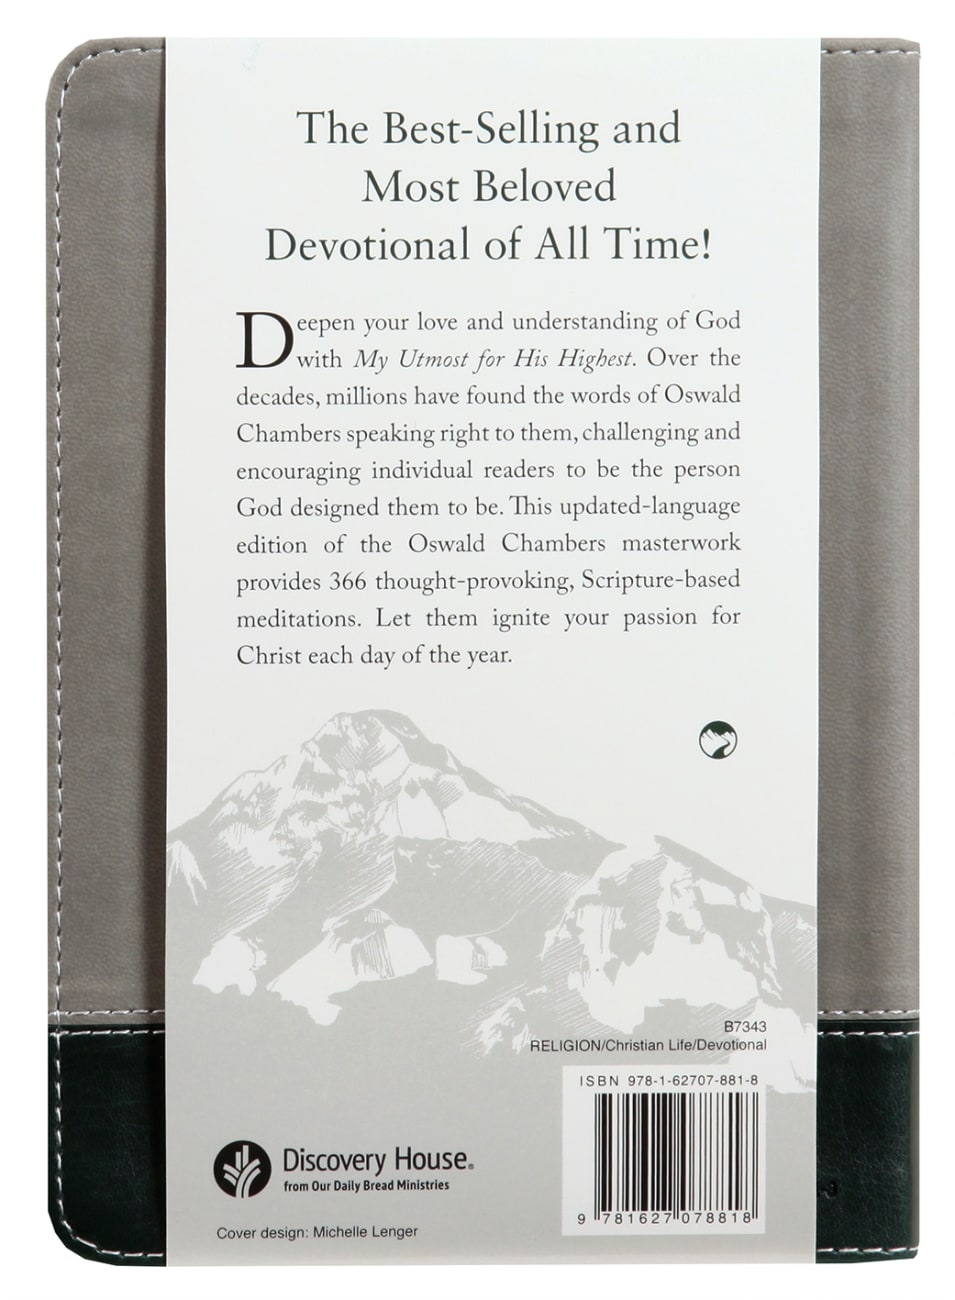 My Utmost For His Highest (Gift Edition) Imitation Leather